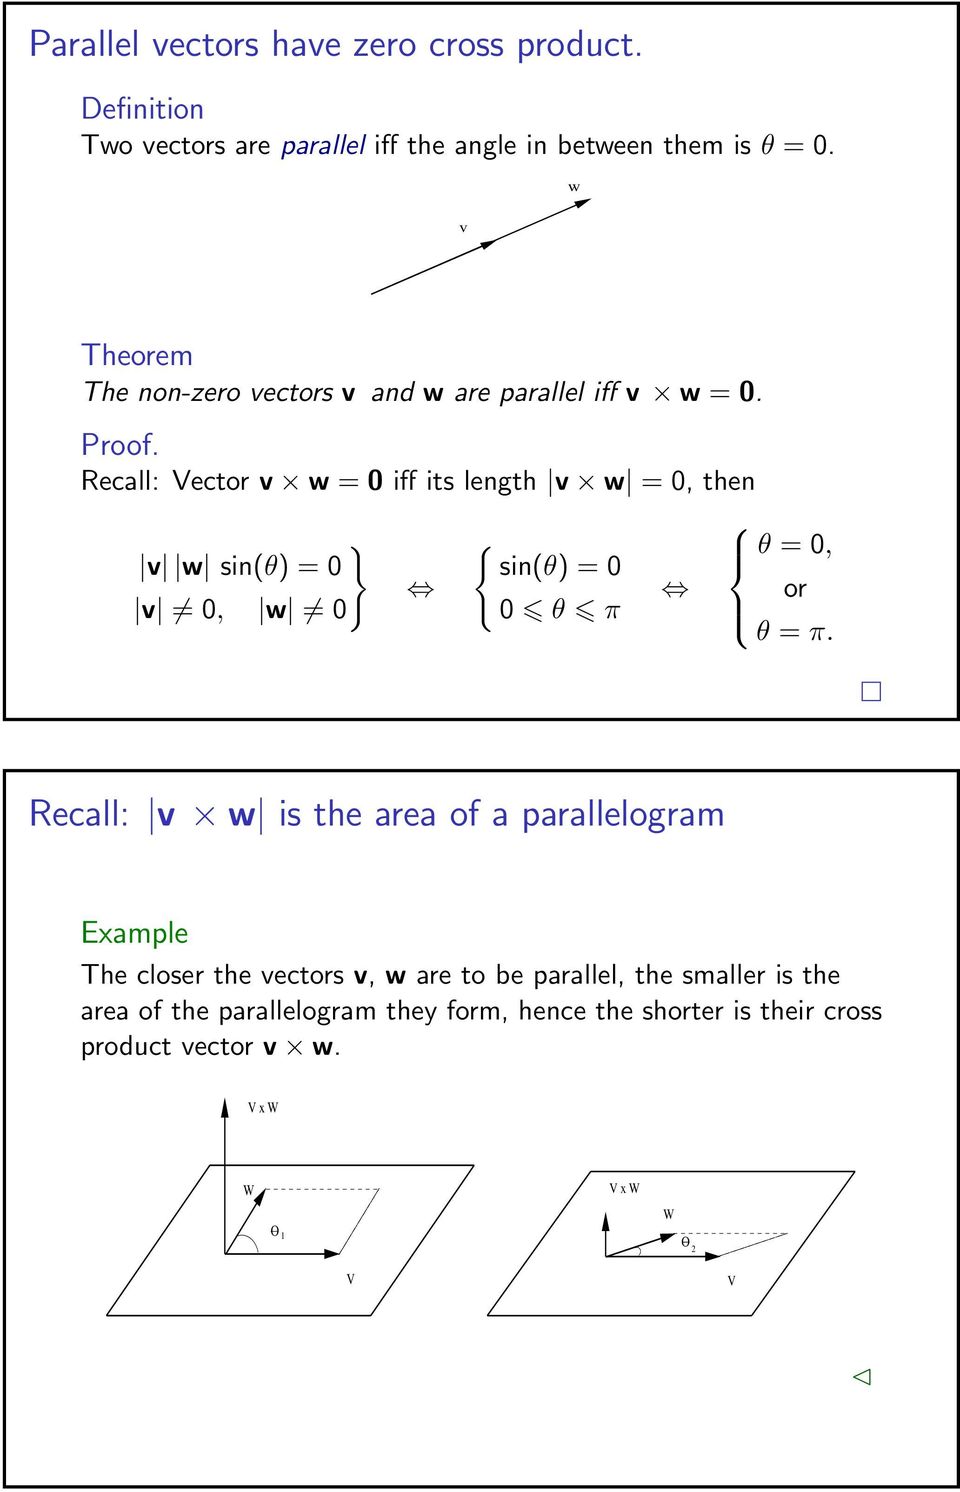 Recall: v w is the area of a parallelogram Example The closer the vectors v, w are to be parallel, the smaller is the area of the parallelogram they form, hence the shorter is their cross